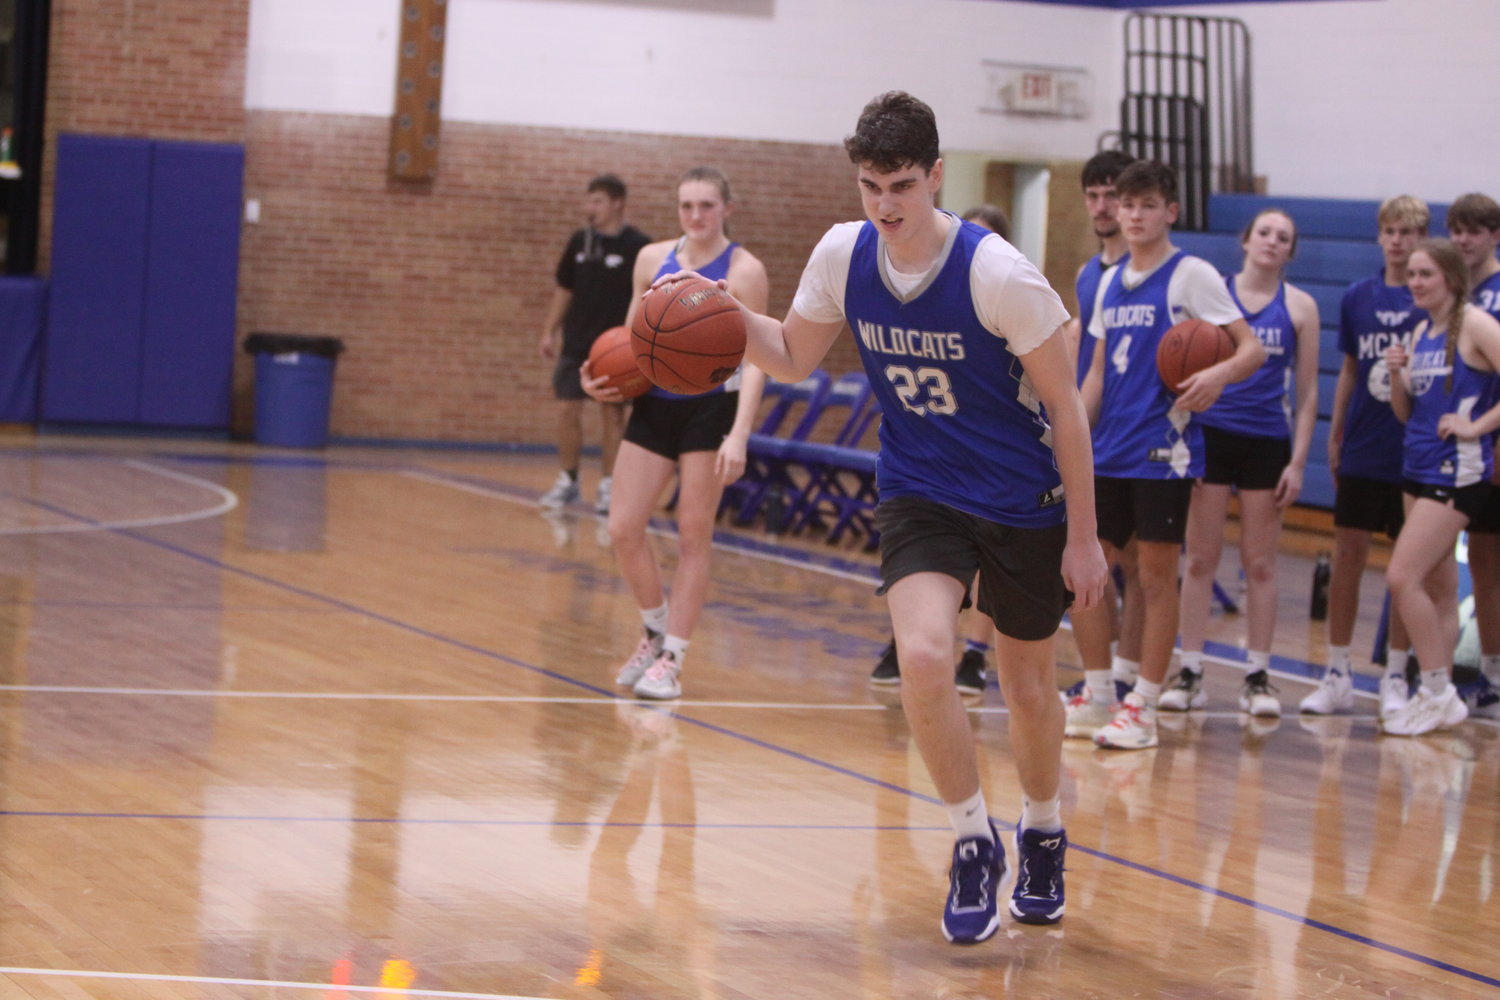 Montgomery County sophomore Clayton Parker dribbles up the court during the Blue and White scrimmage on Nov. 10 at Ballew & Snell Court. Parker is the Wildcats’ top returner from last year’s team that won 17 games and captured a district title.